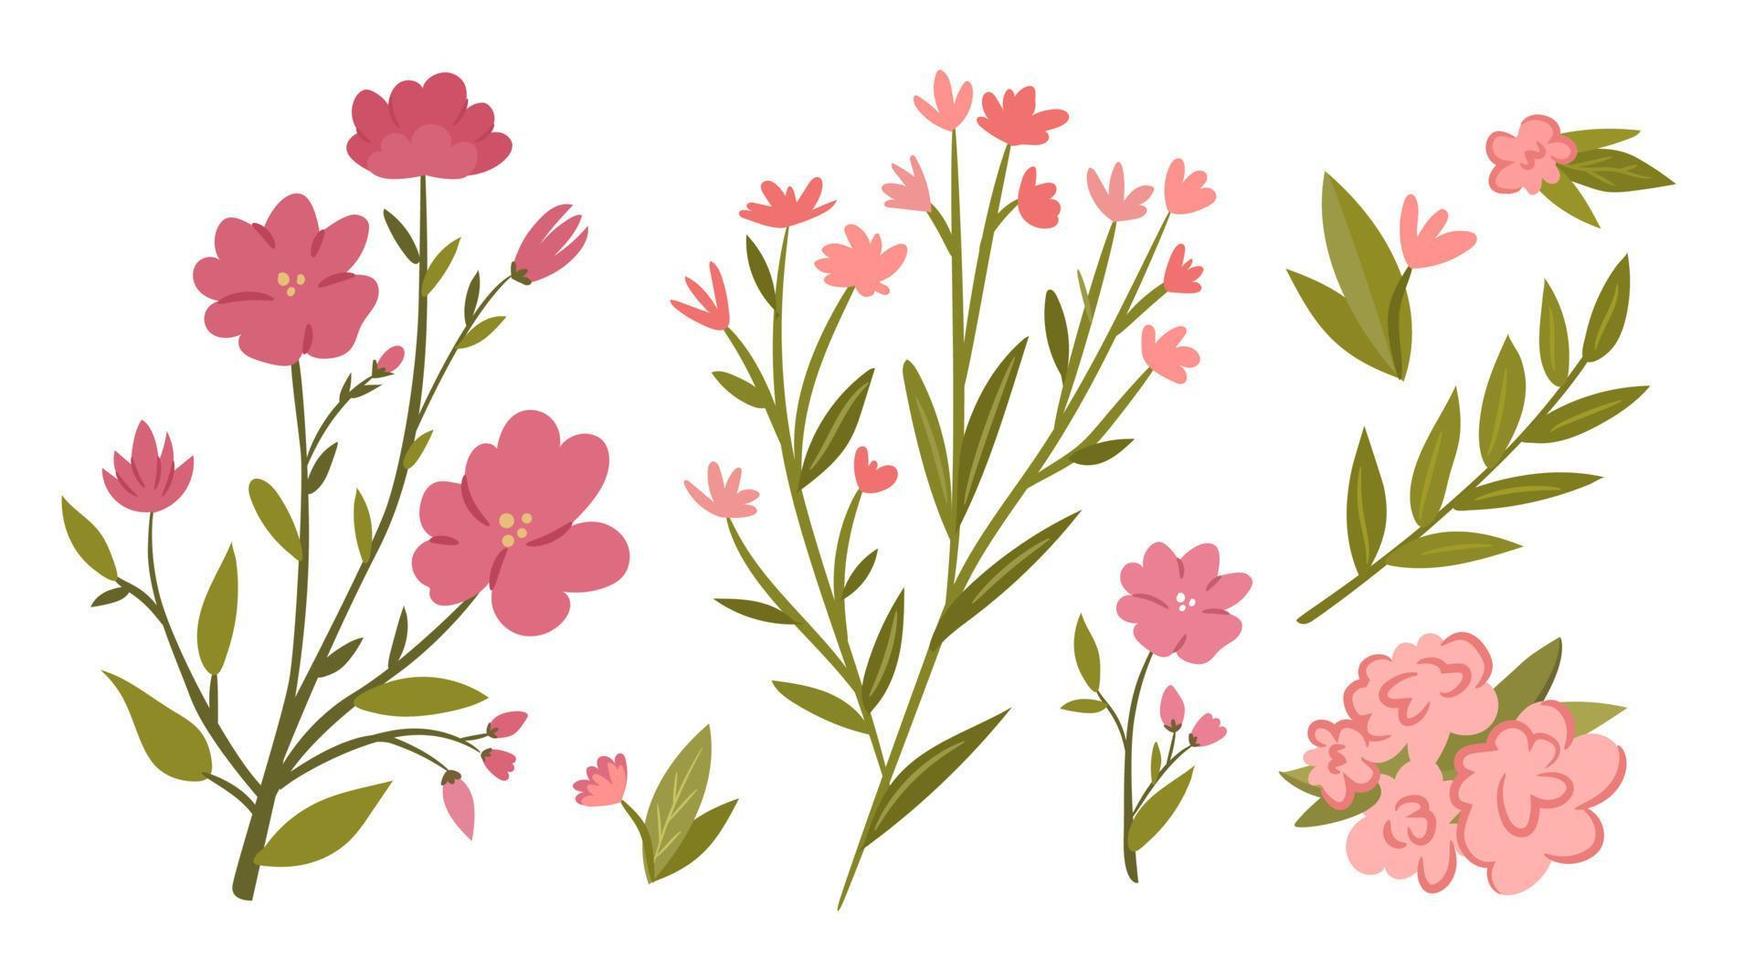 Pink flower and branch set. Collection of cute flower branches and leaves. Flat vector illustration